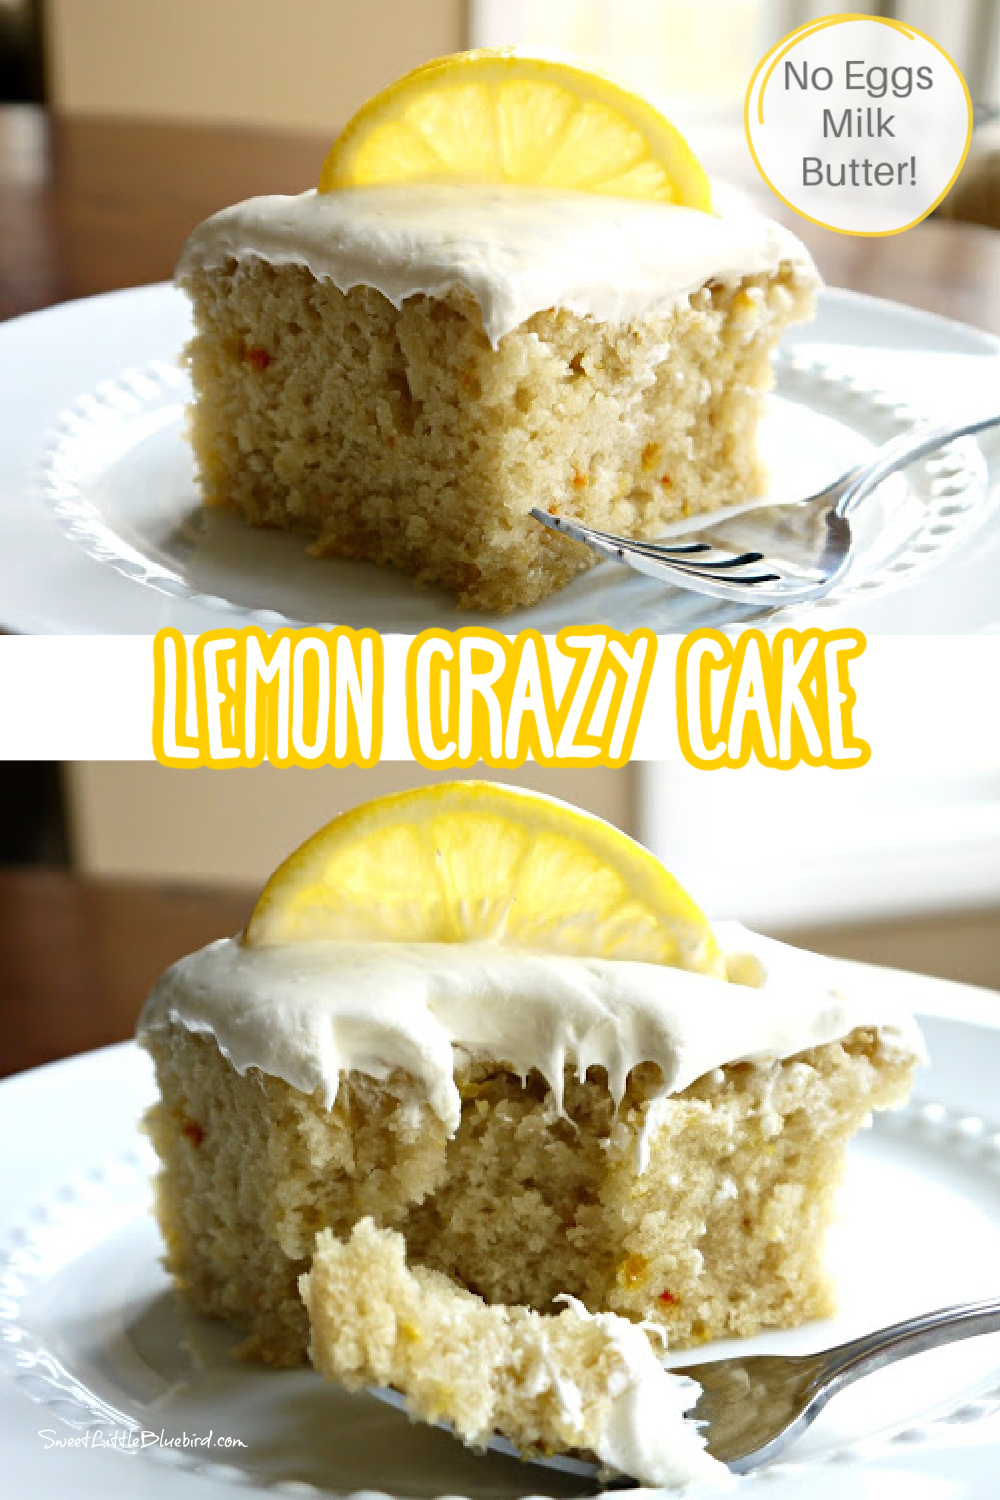 2 photo collage - top photo is a piece of lemon crazy cake on a white plate with a fork. Bottom photo is the same piece of cake with a bite take out and cake on a fork - by Sweet Little Bluebird